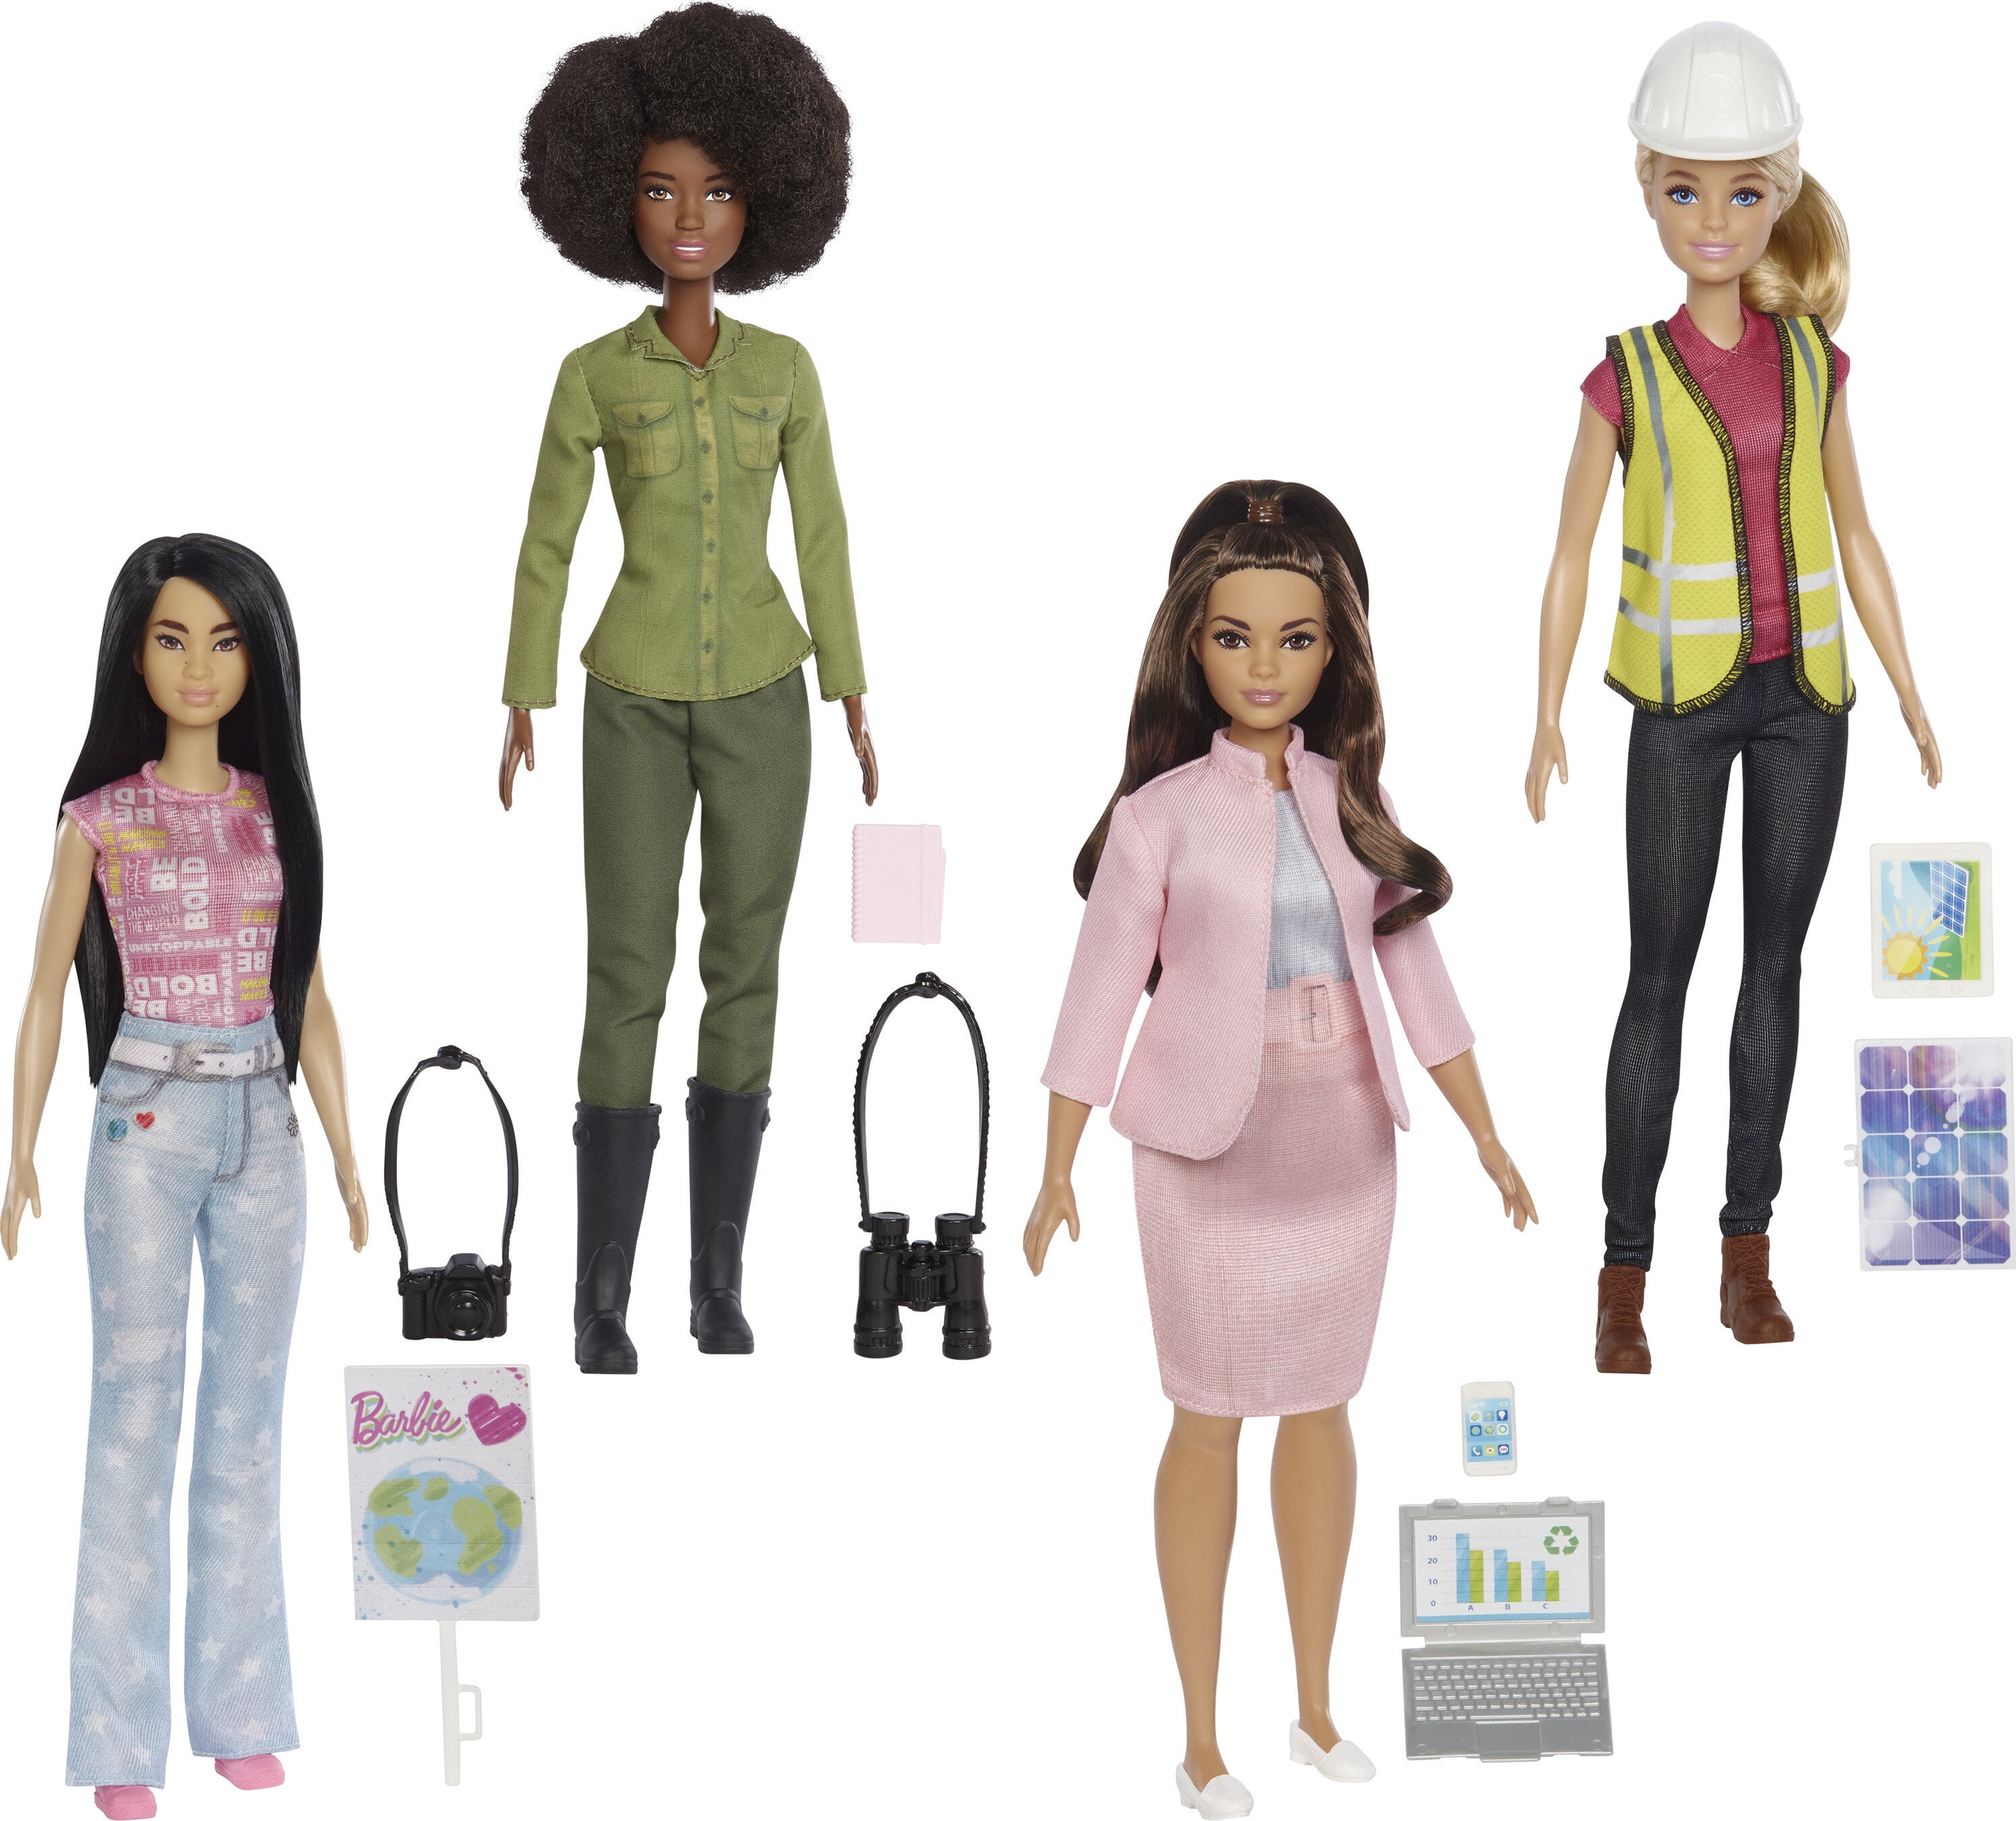 Barbie Career of the Year Eco-Leadership Team 4 Doll Set, Recycled Plastic (Except Head & Hair)